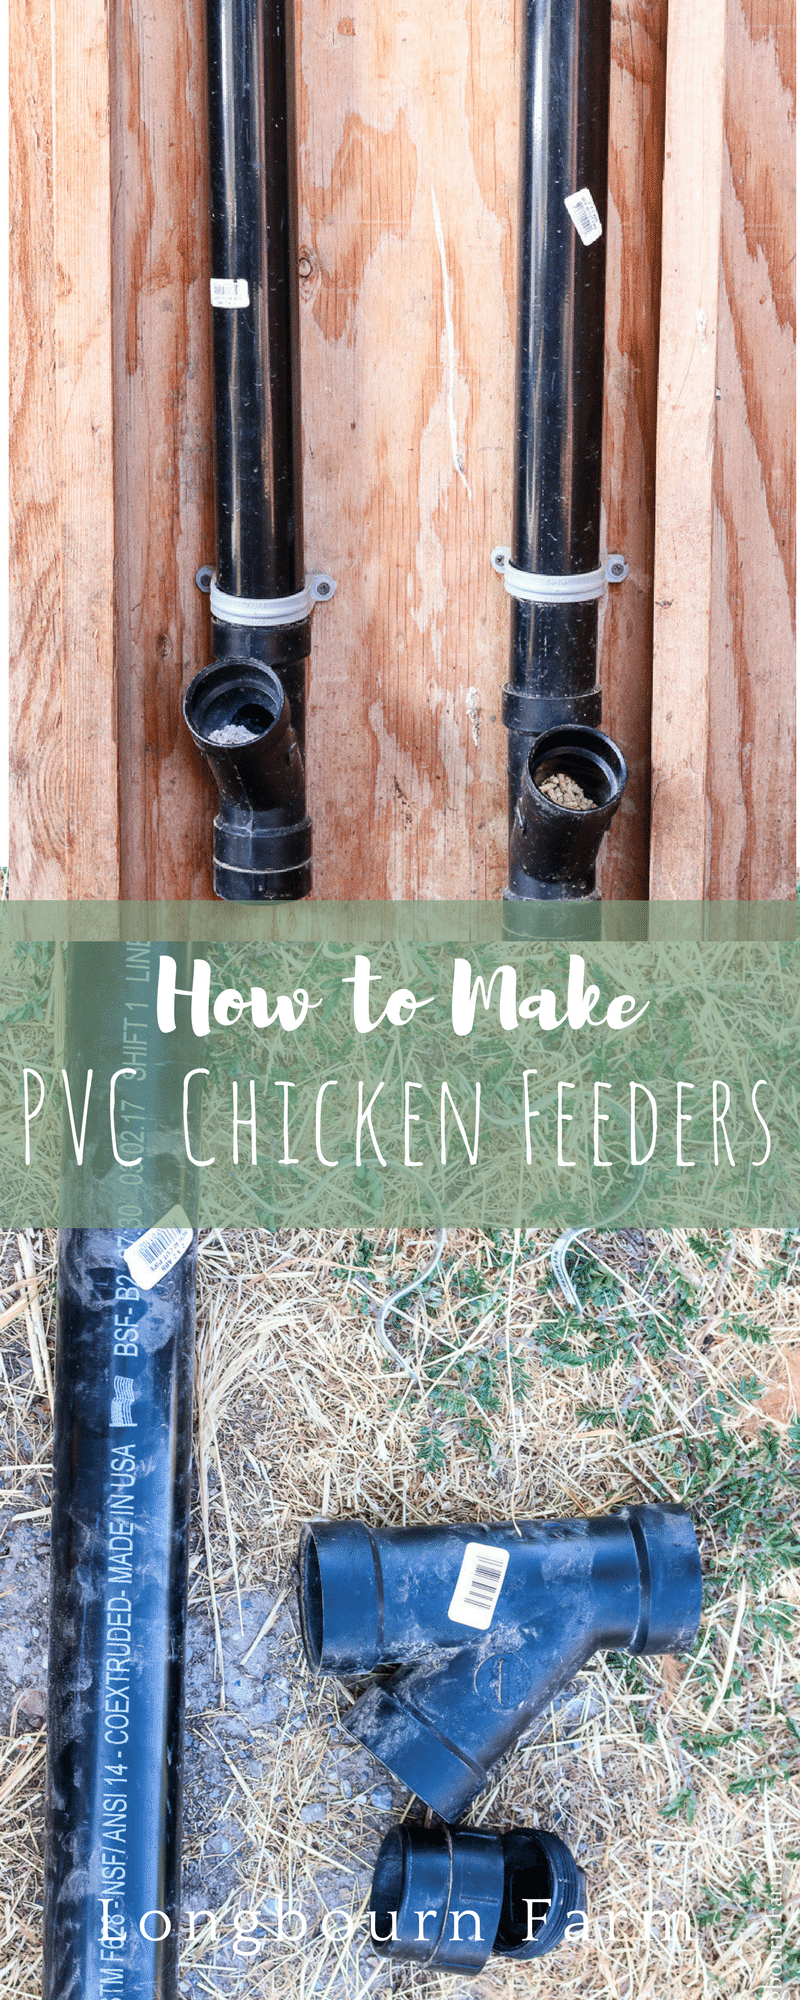 Easy DIY PVC Chicken Feeder! All the supplies and step-by-step instructions (with pictures!) so you can make your own. Make it today for less than $10!